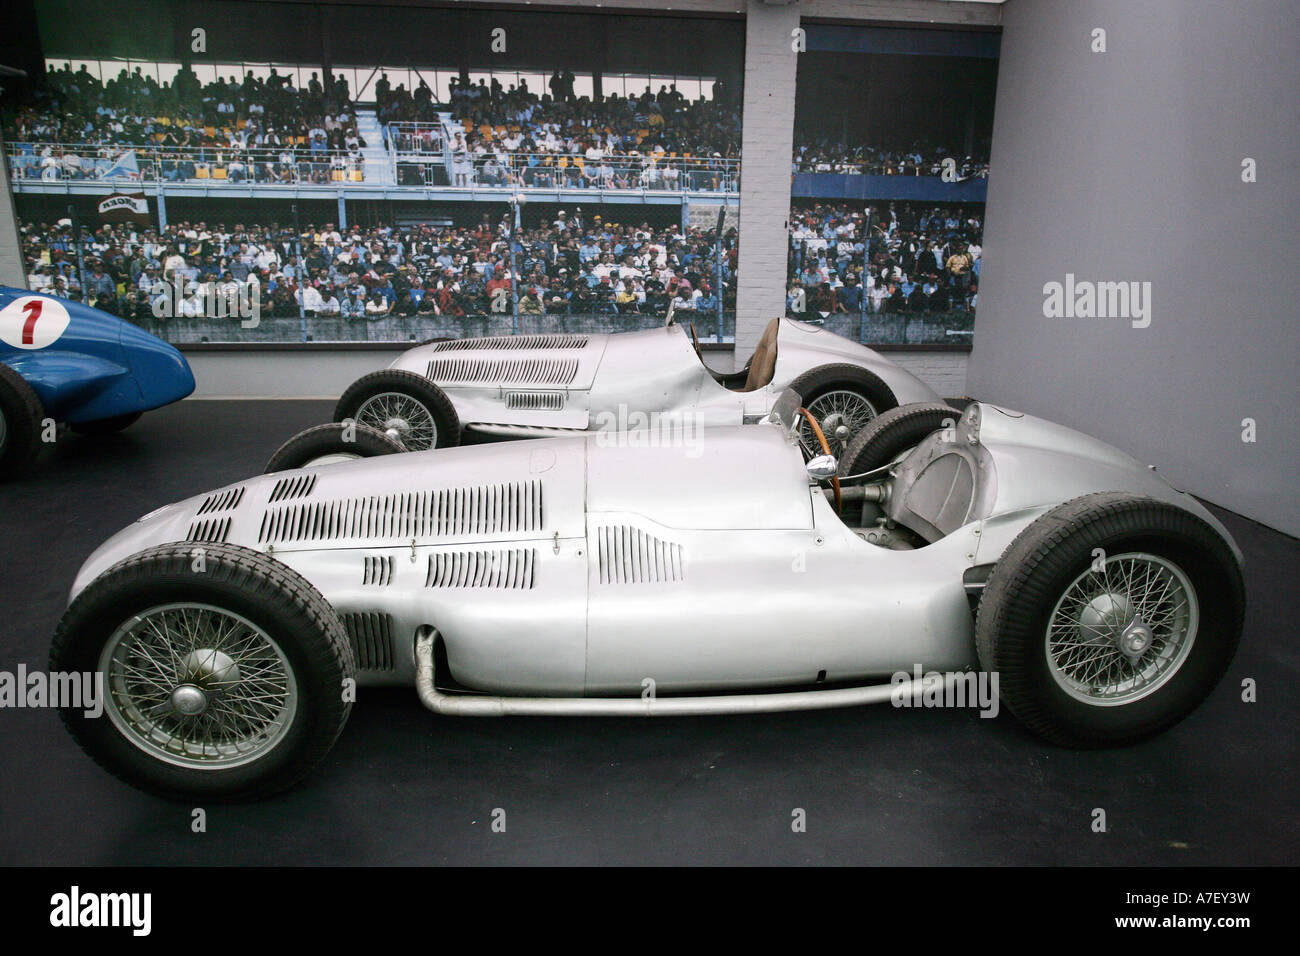 Mercedes-Benz-Silberpfeile in National automobile-museum Mulhouse, Alsace, France Stock Photo